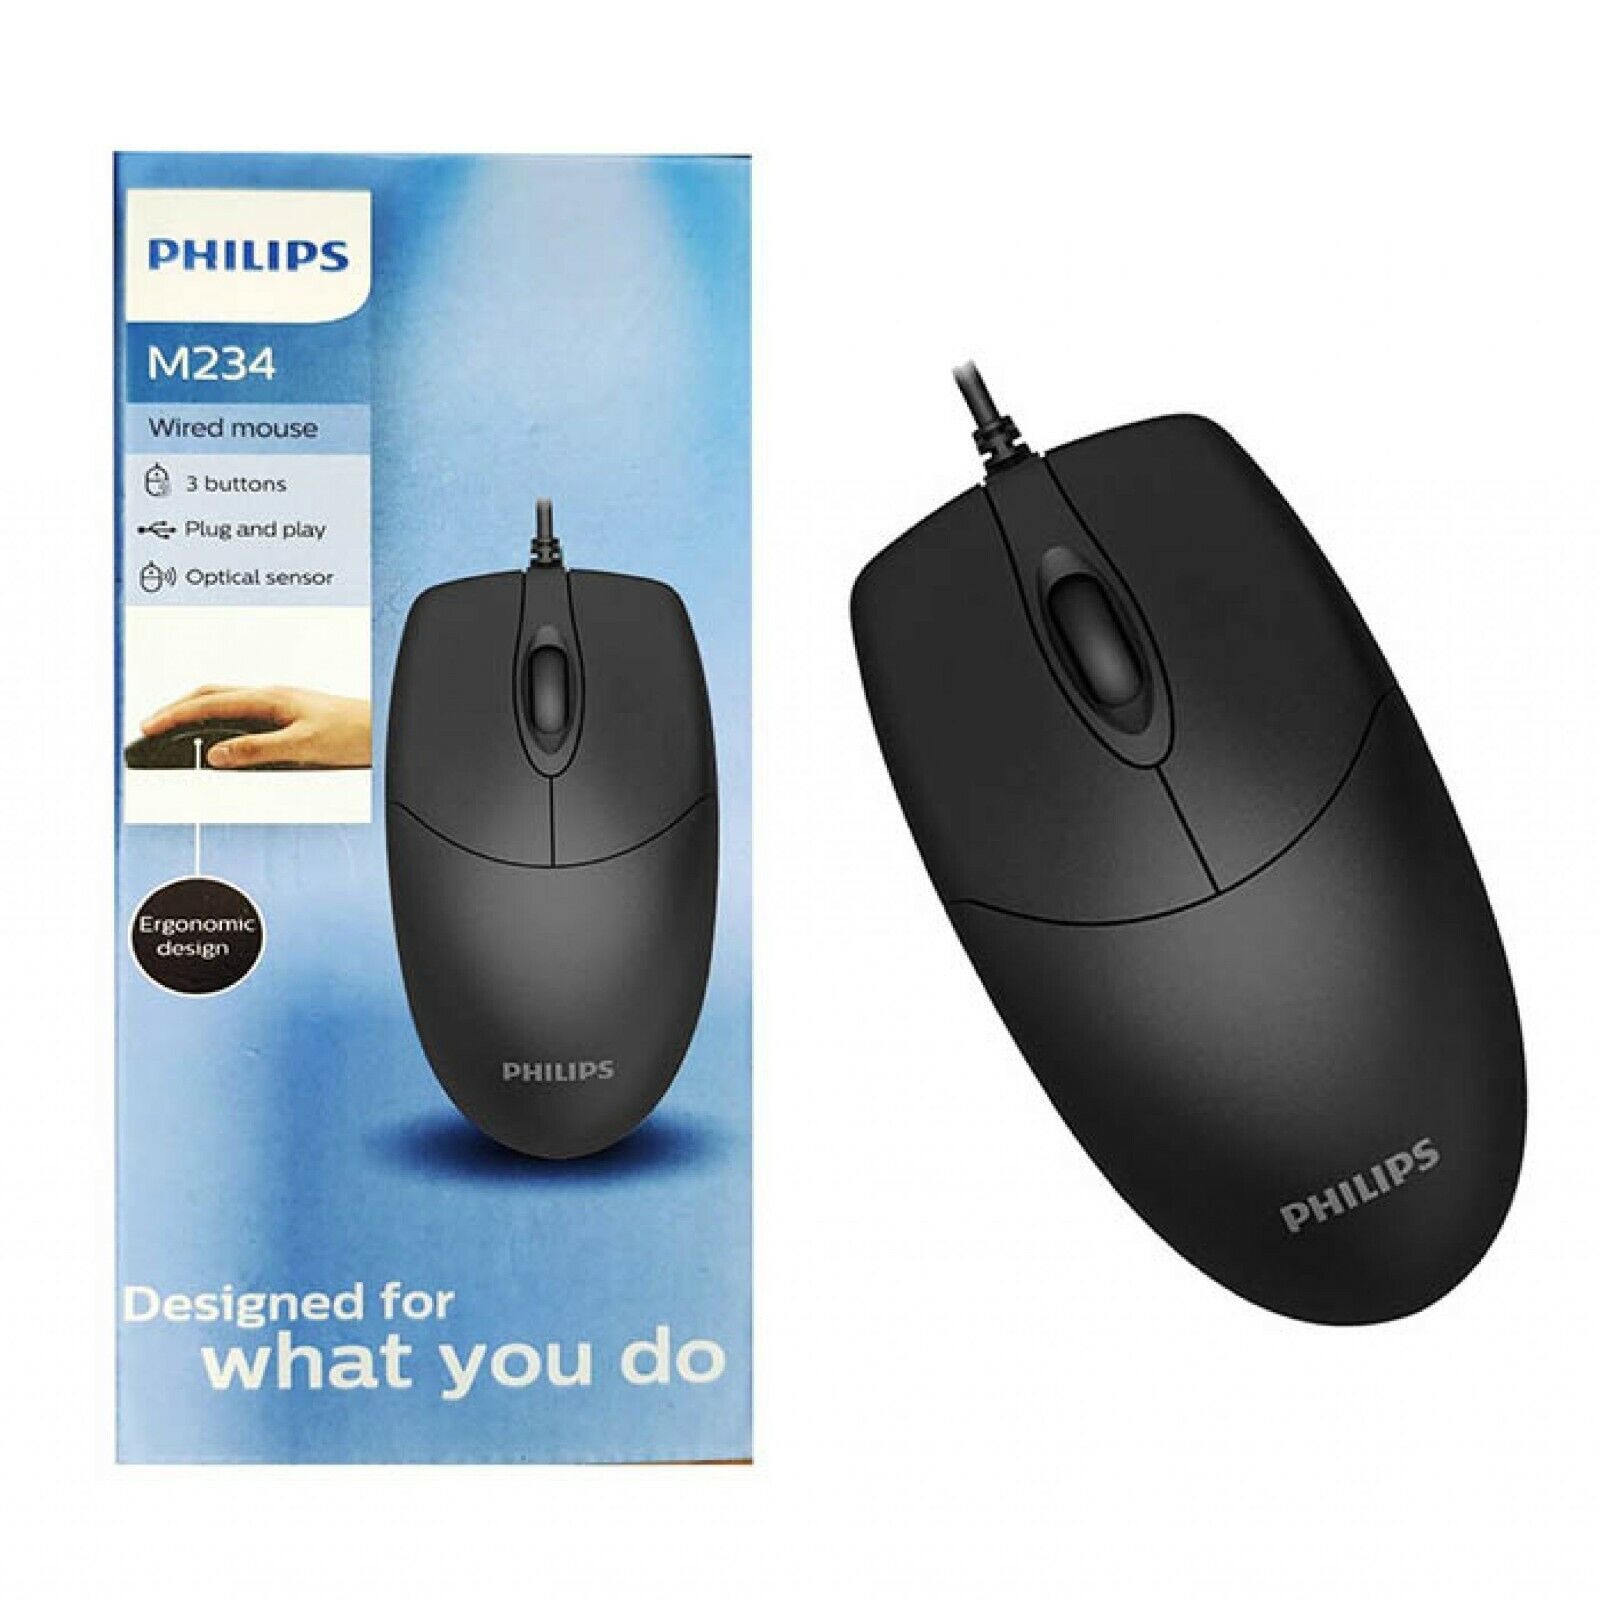 Philips SPK7234 USB Wired Computer Mouse for PC Laptop Desktop Computers